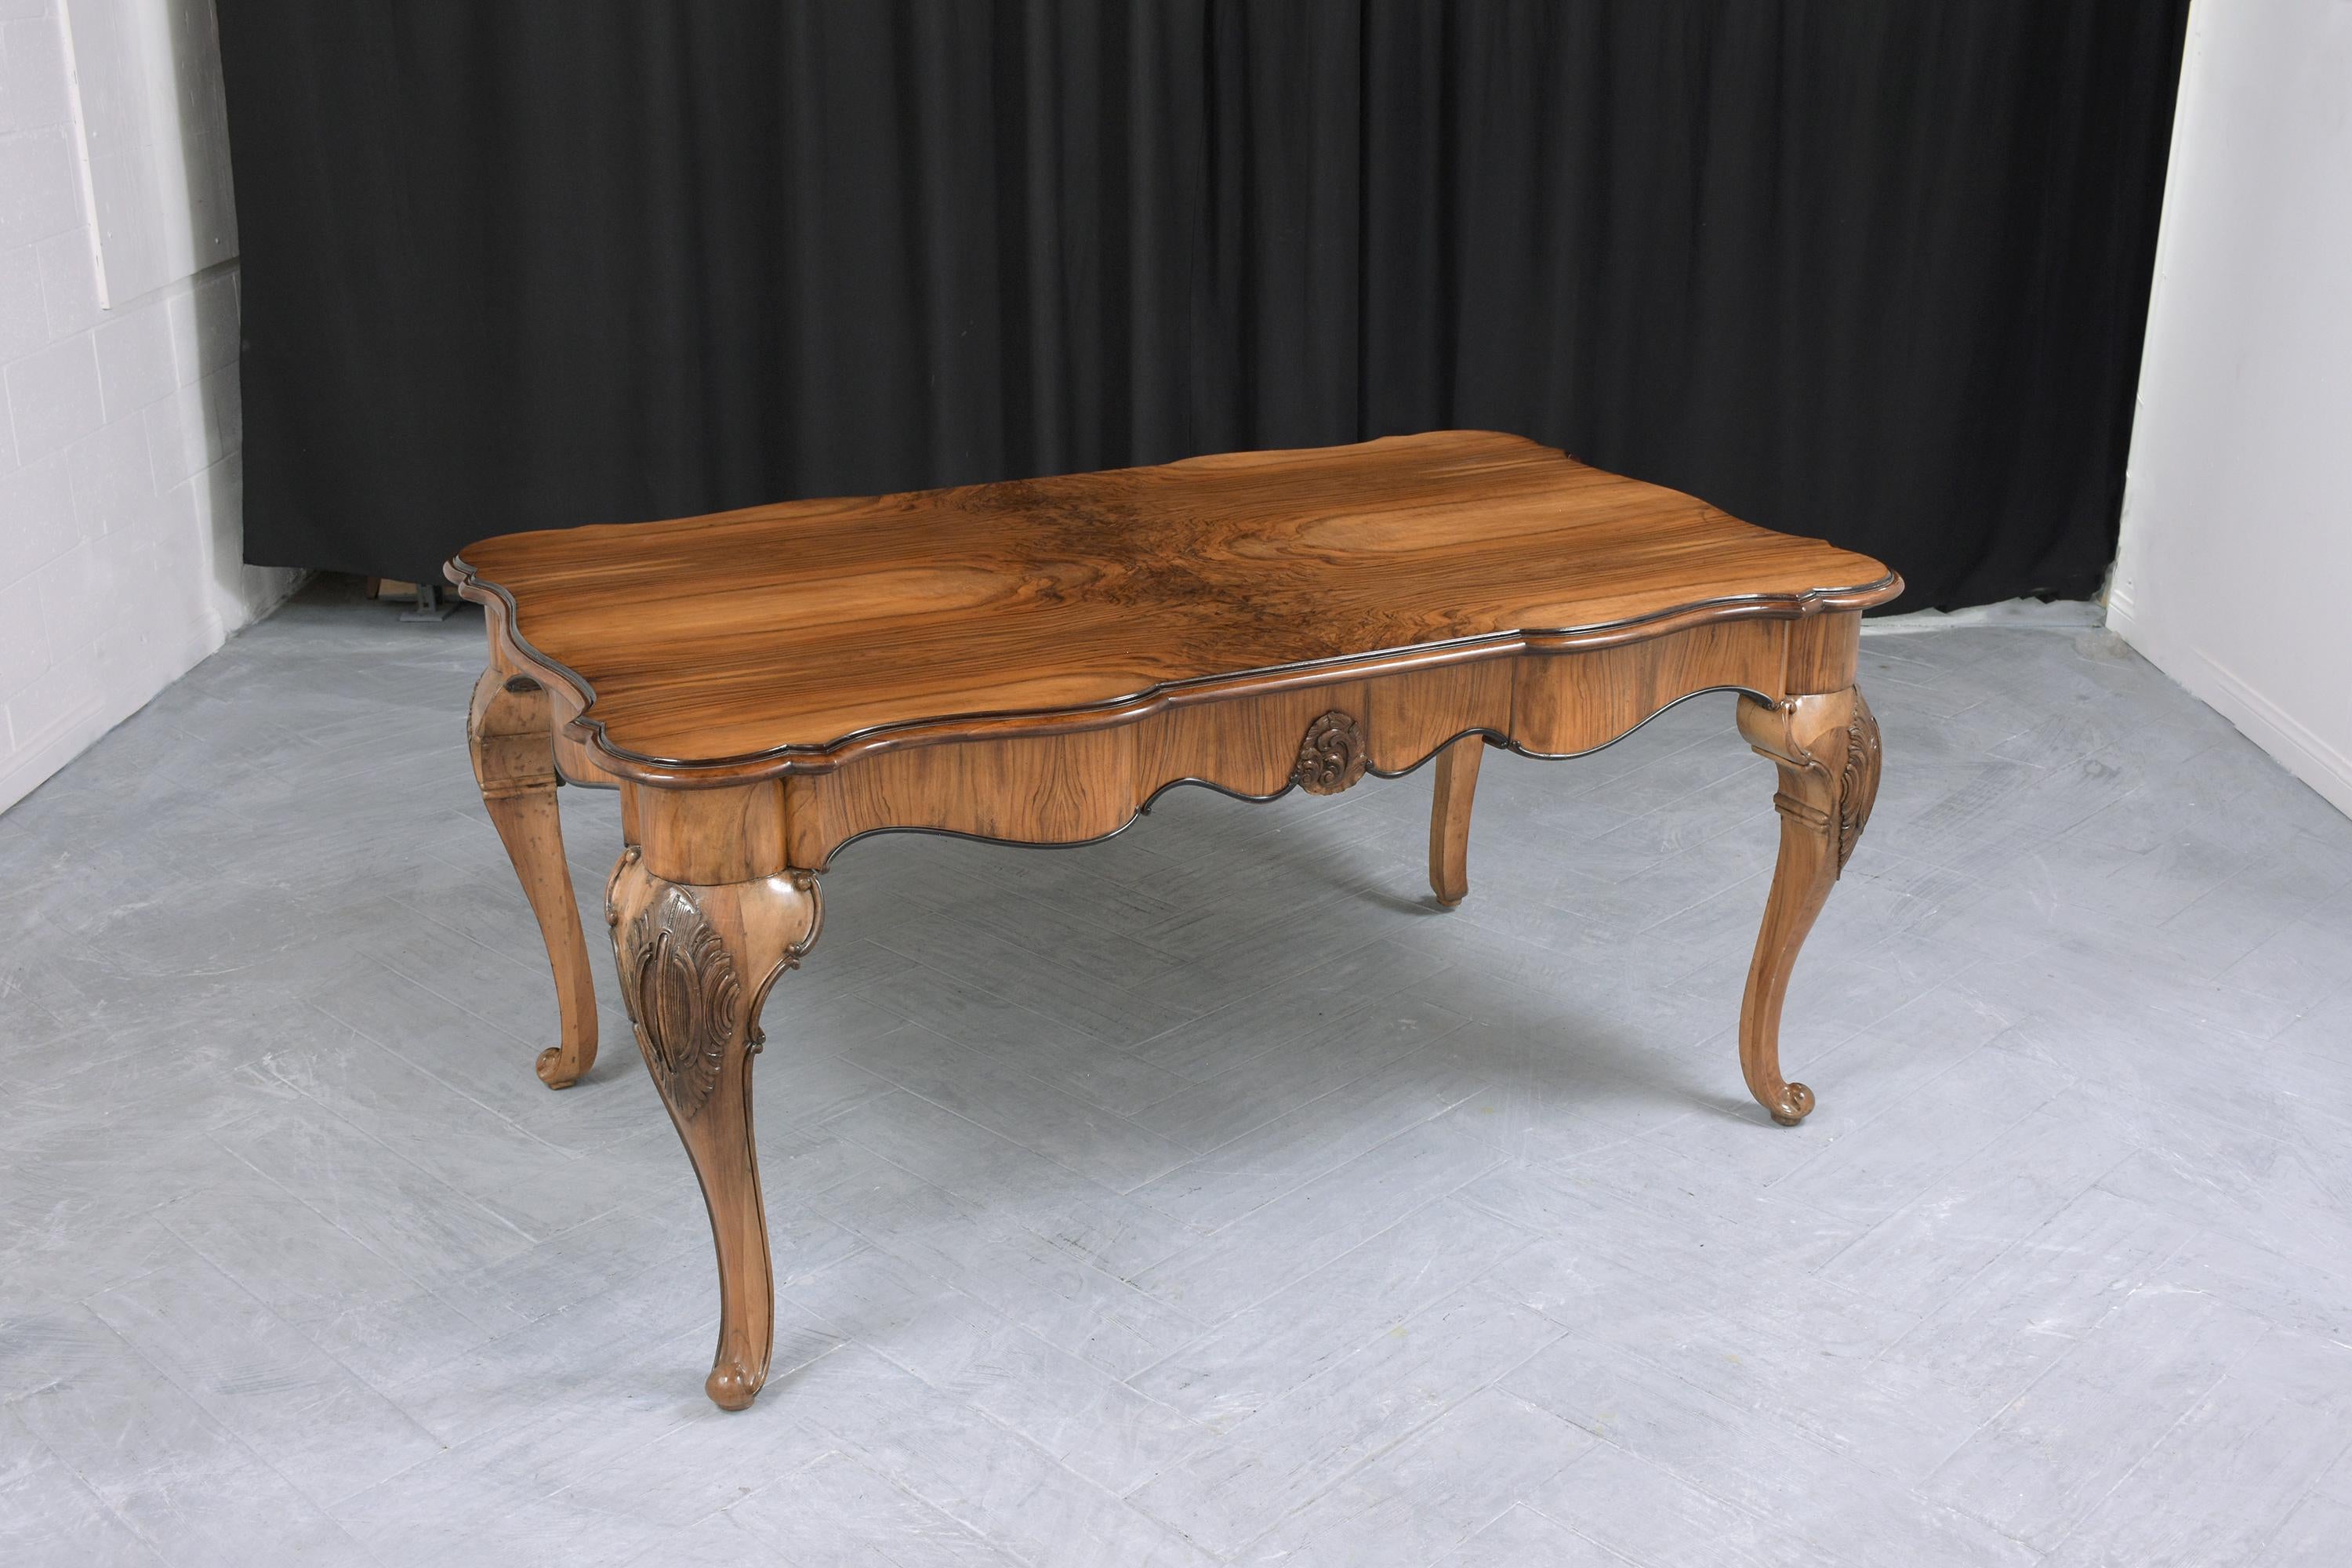 Patinated Late 19th-Century English Walnut Dining Table with Carved Cabriole Legs